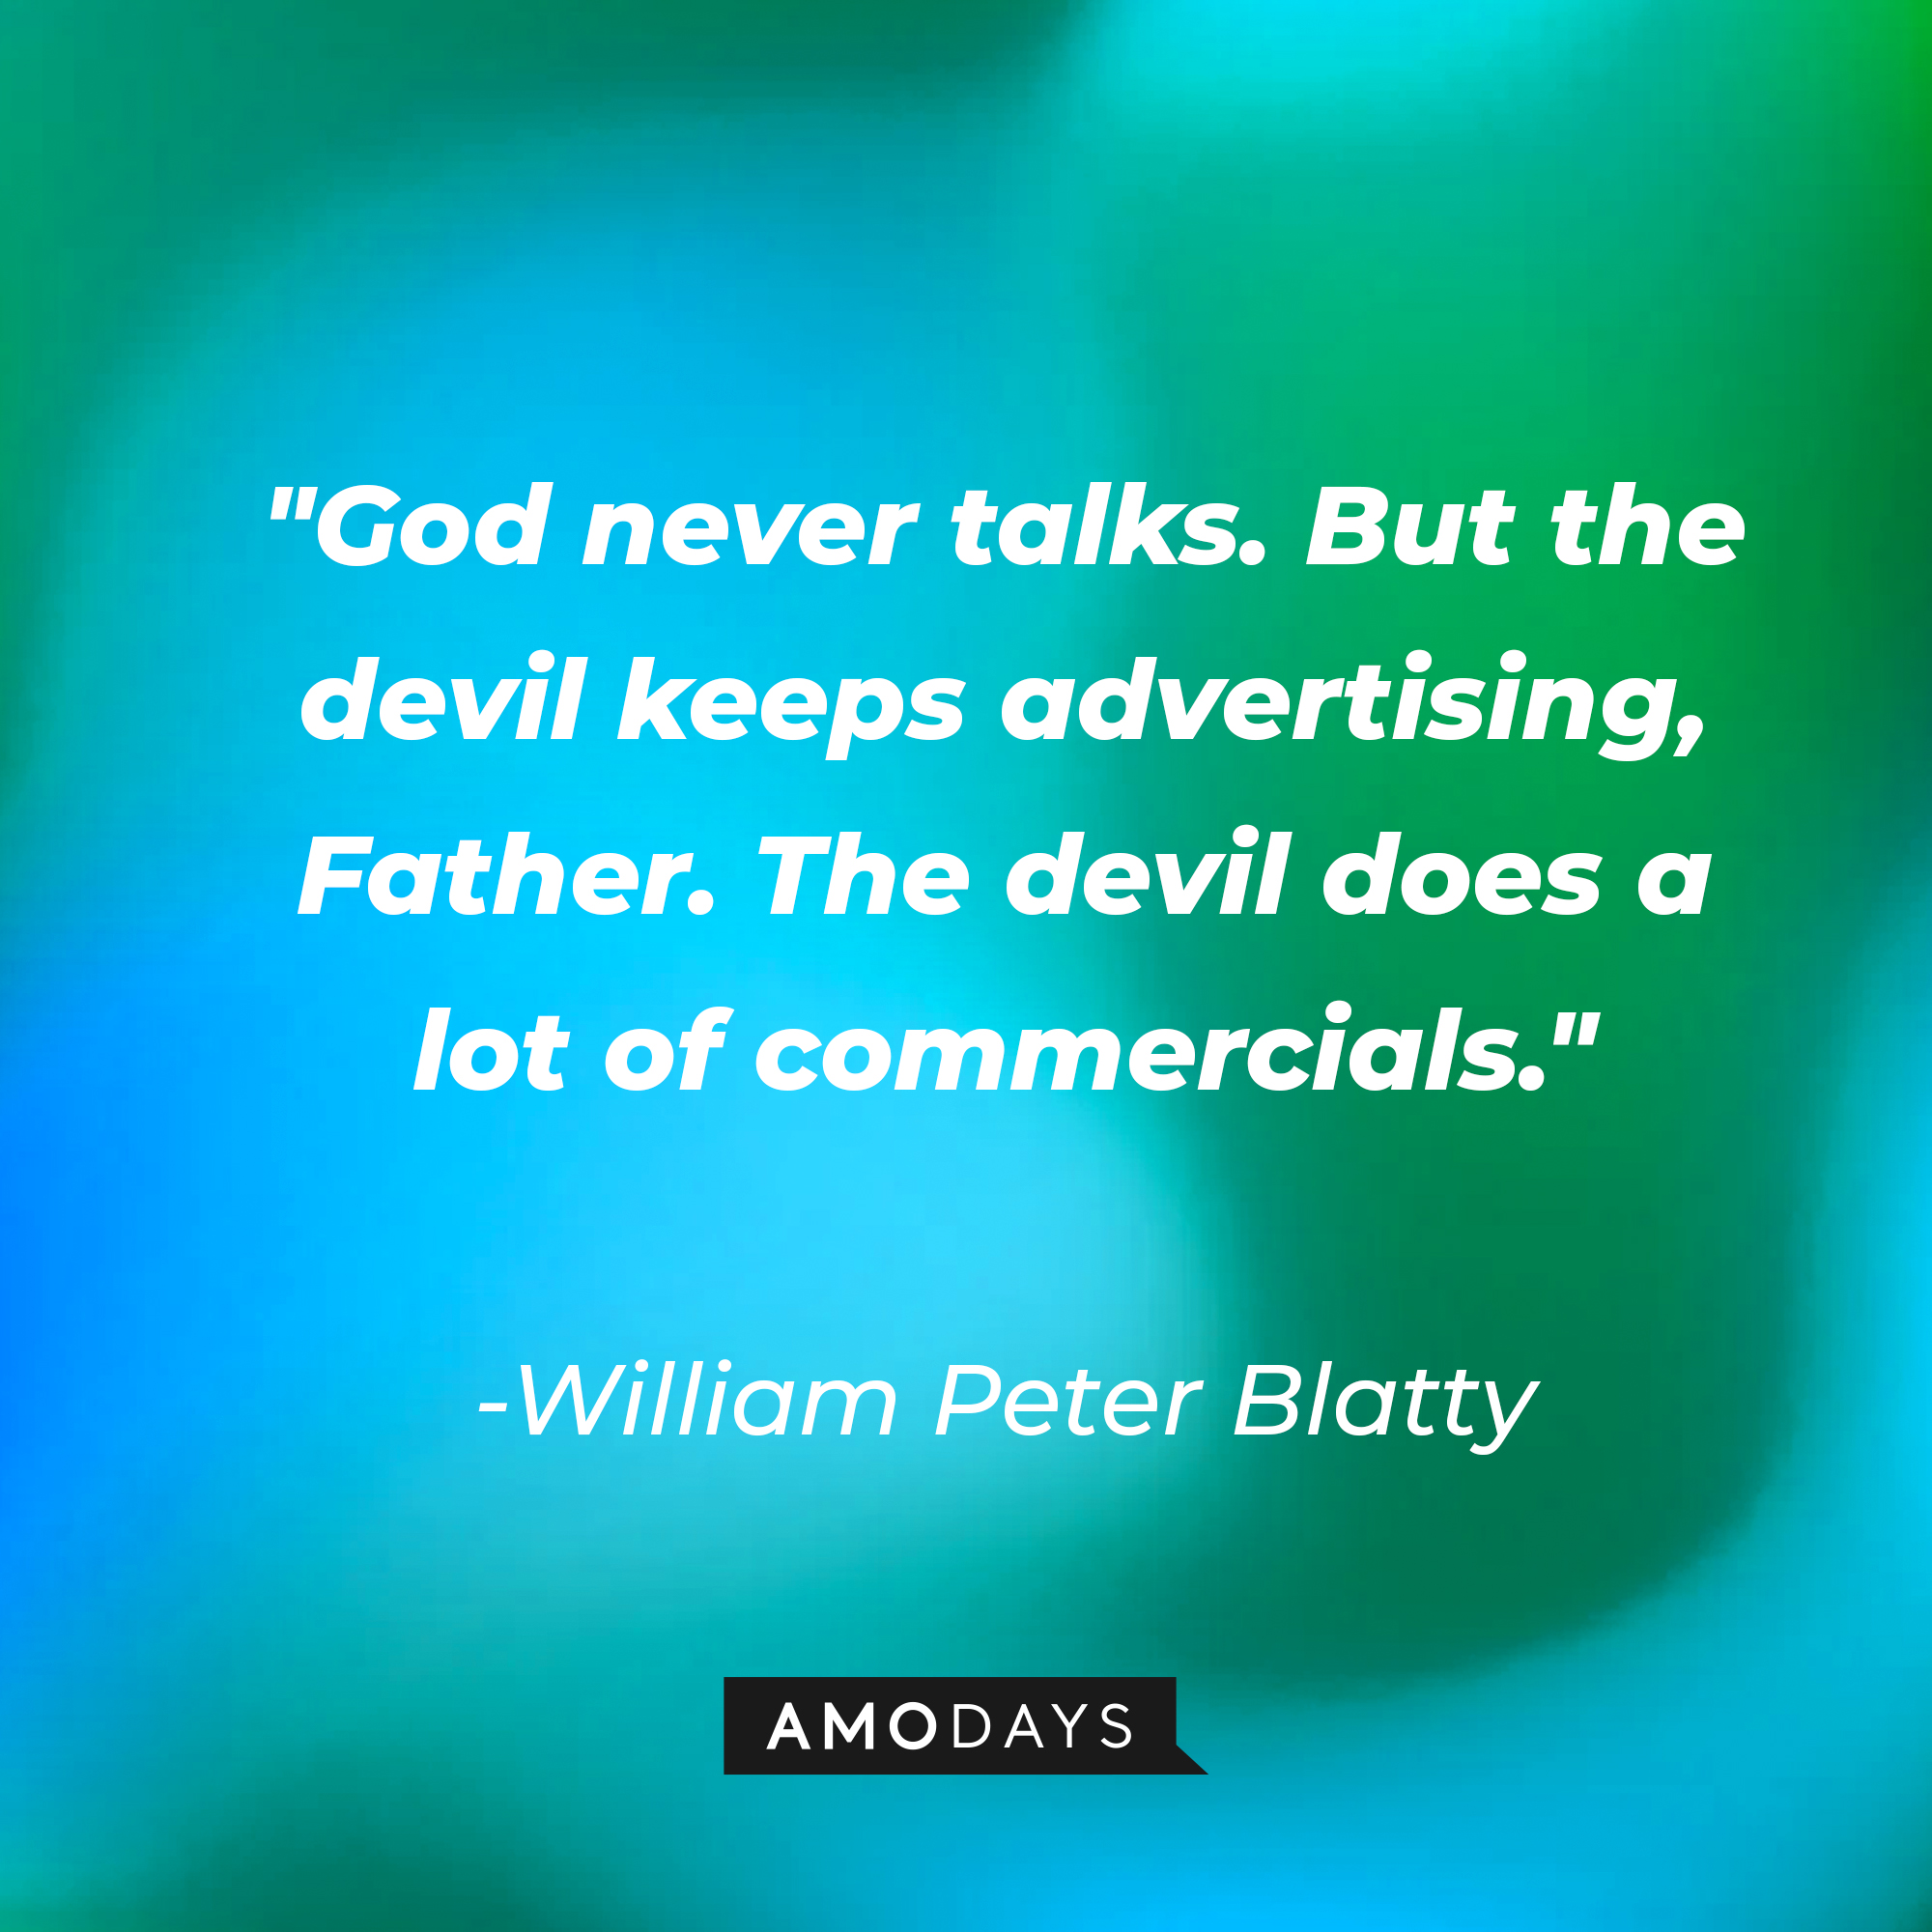 William Peter Blatty's quote: "God never talks. But the devil keeps advertising, Father. The devil does a lot of commercials."\\\\\\\\\\\\\\\\u00a0| Source: AmoDays